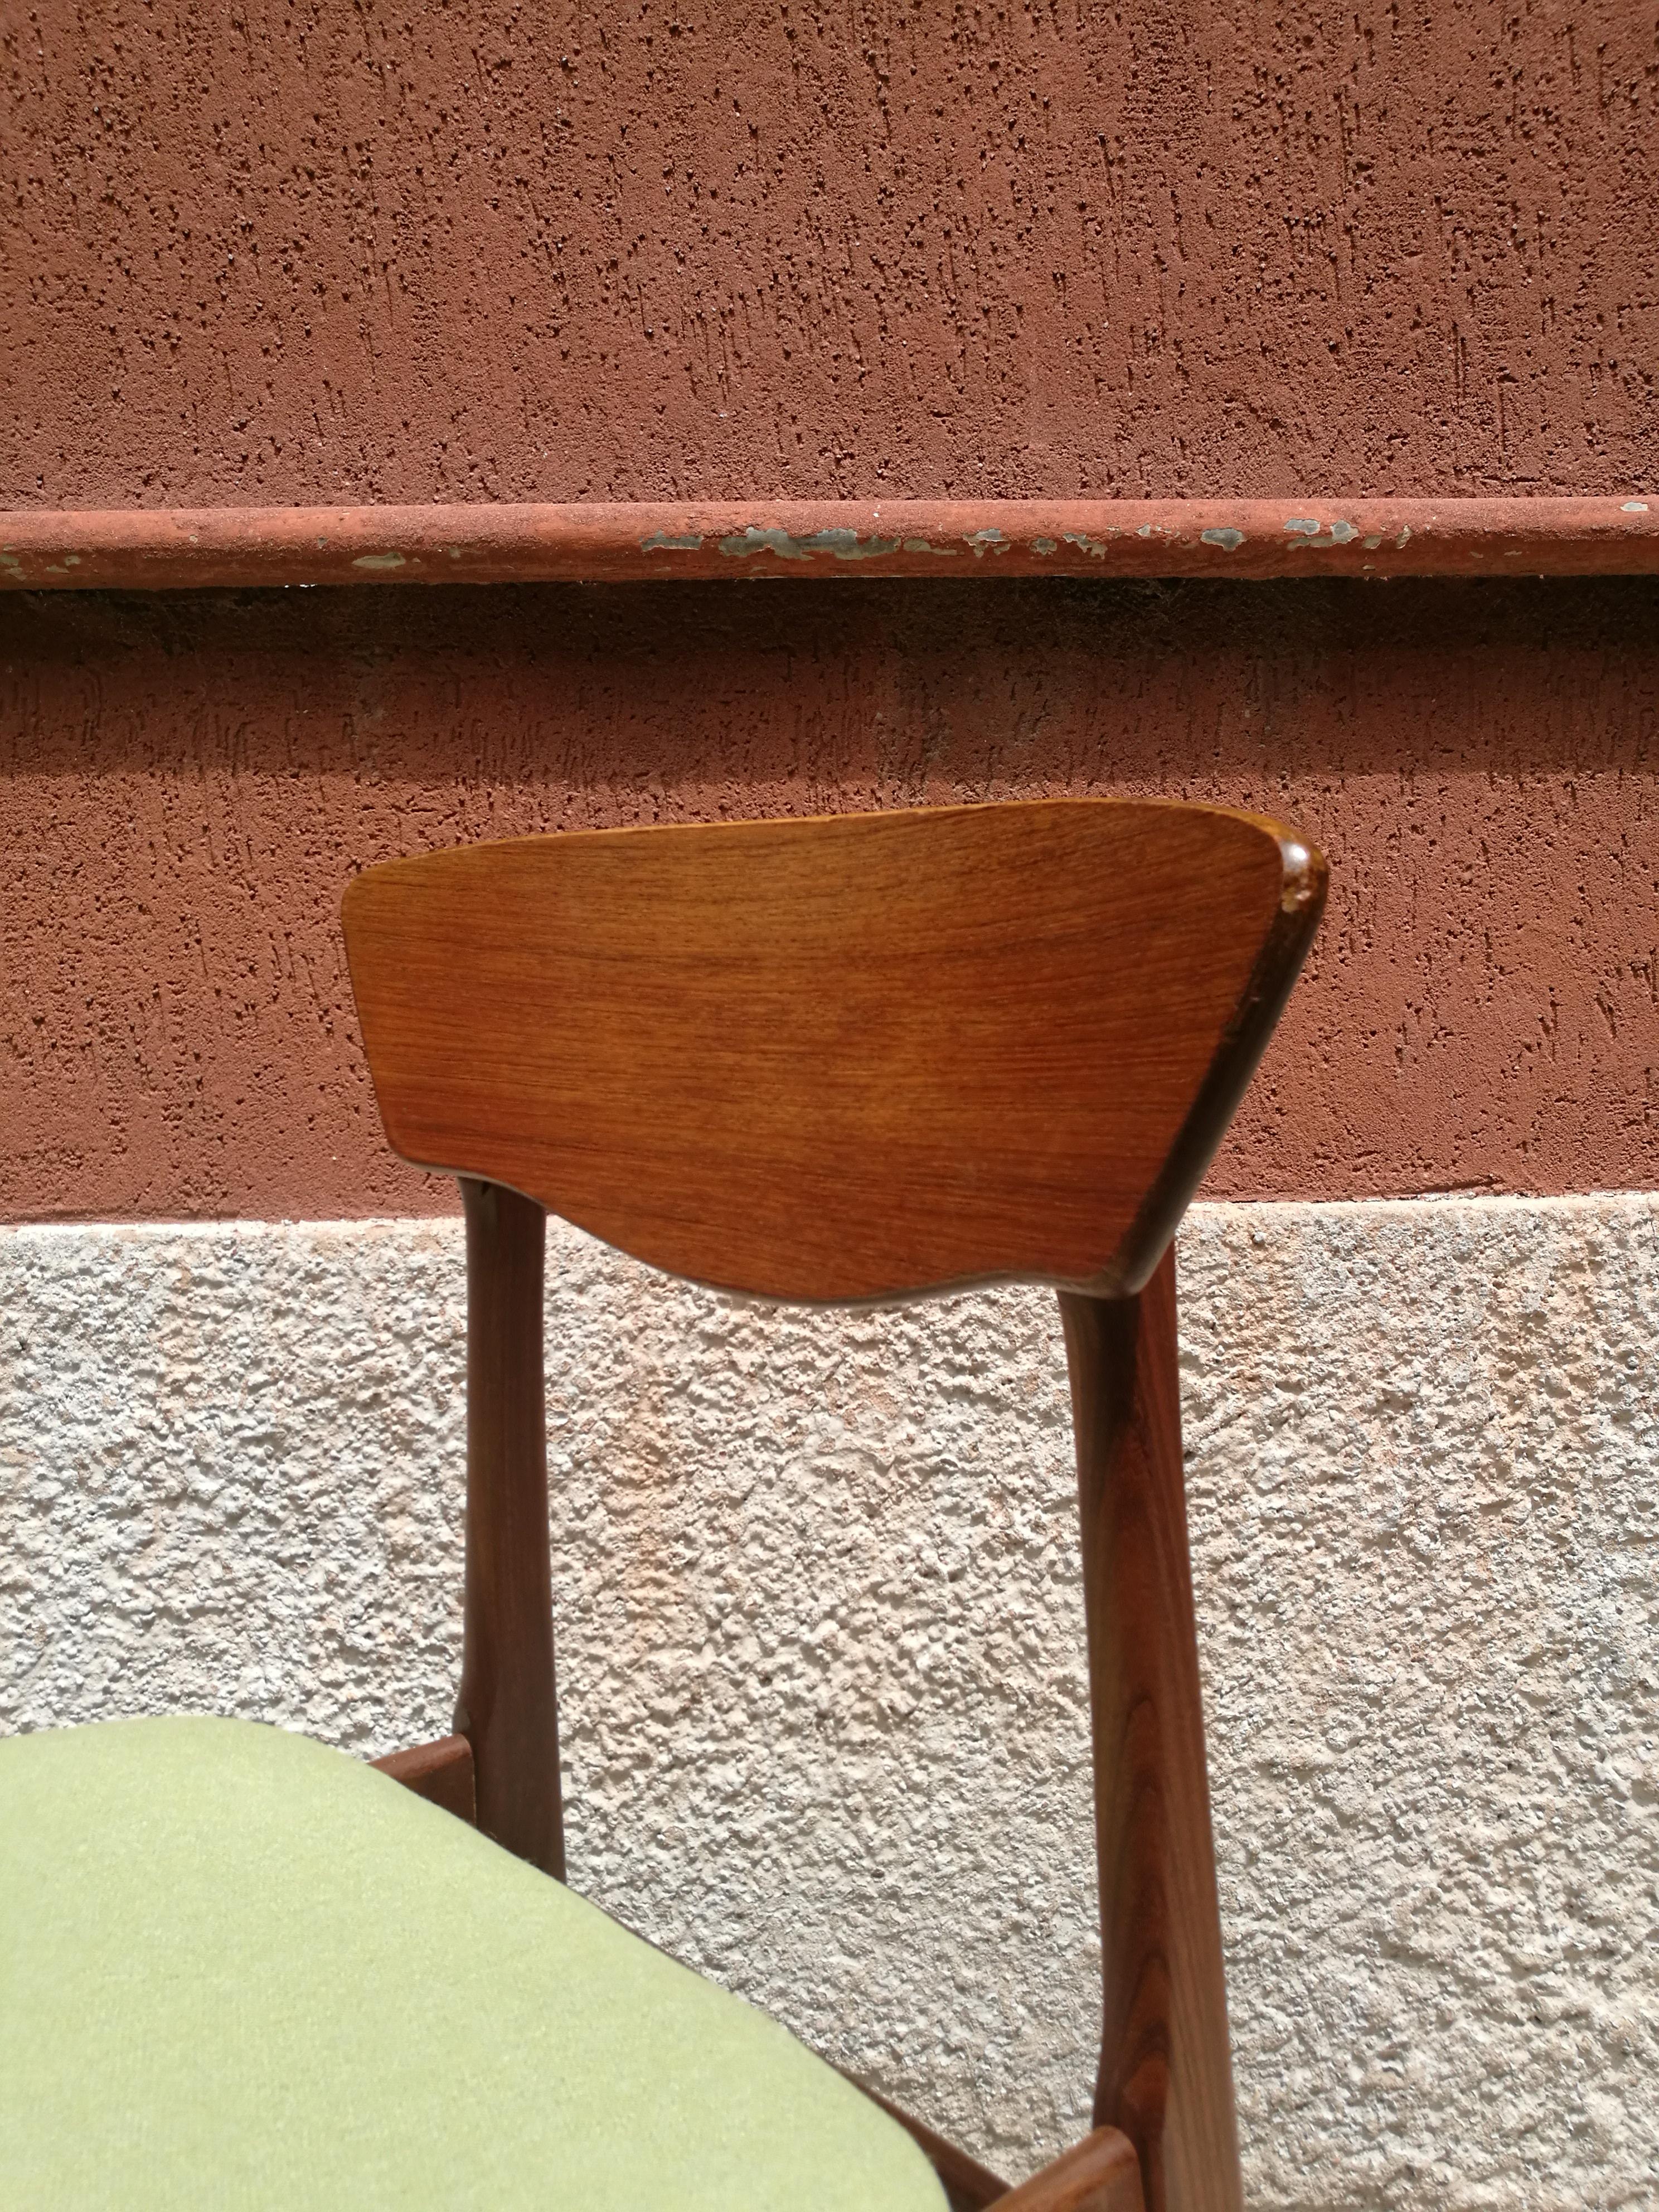 Mid-Century Modern Danish Teak Chairs with Green Seats from 1960s